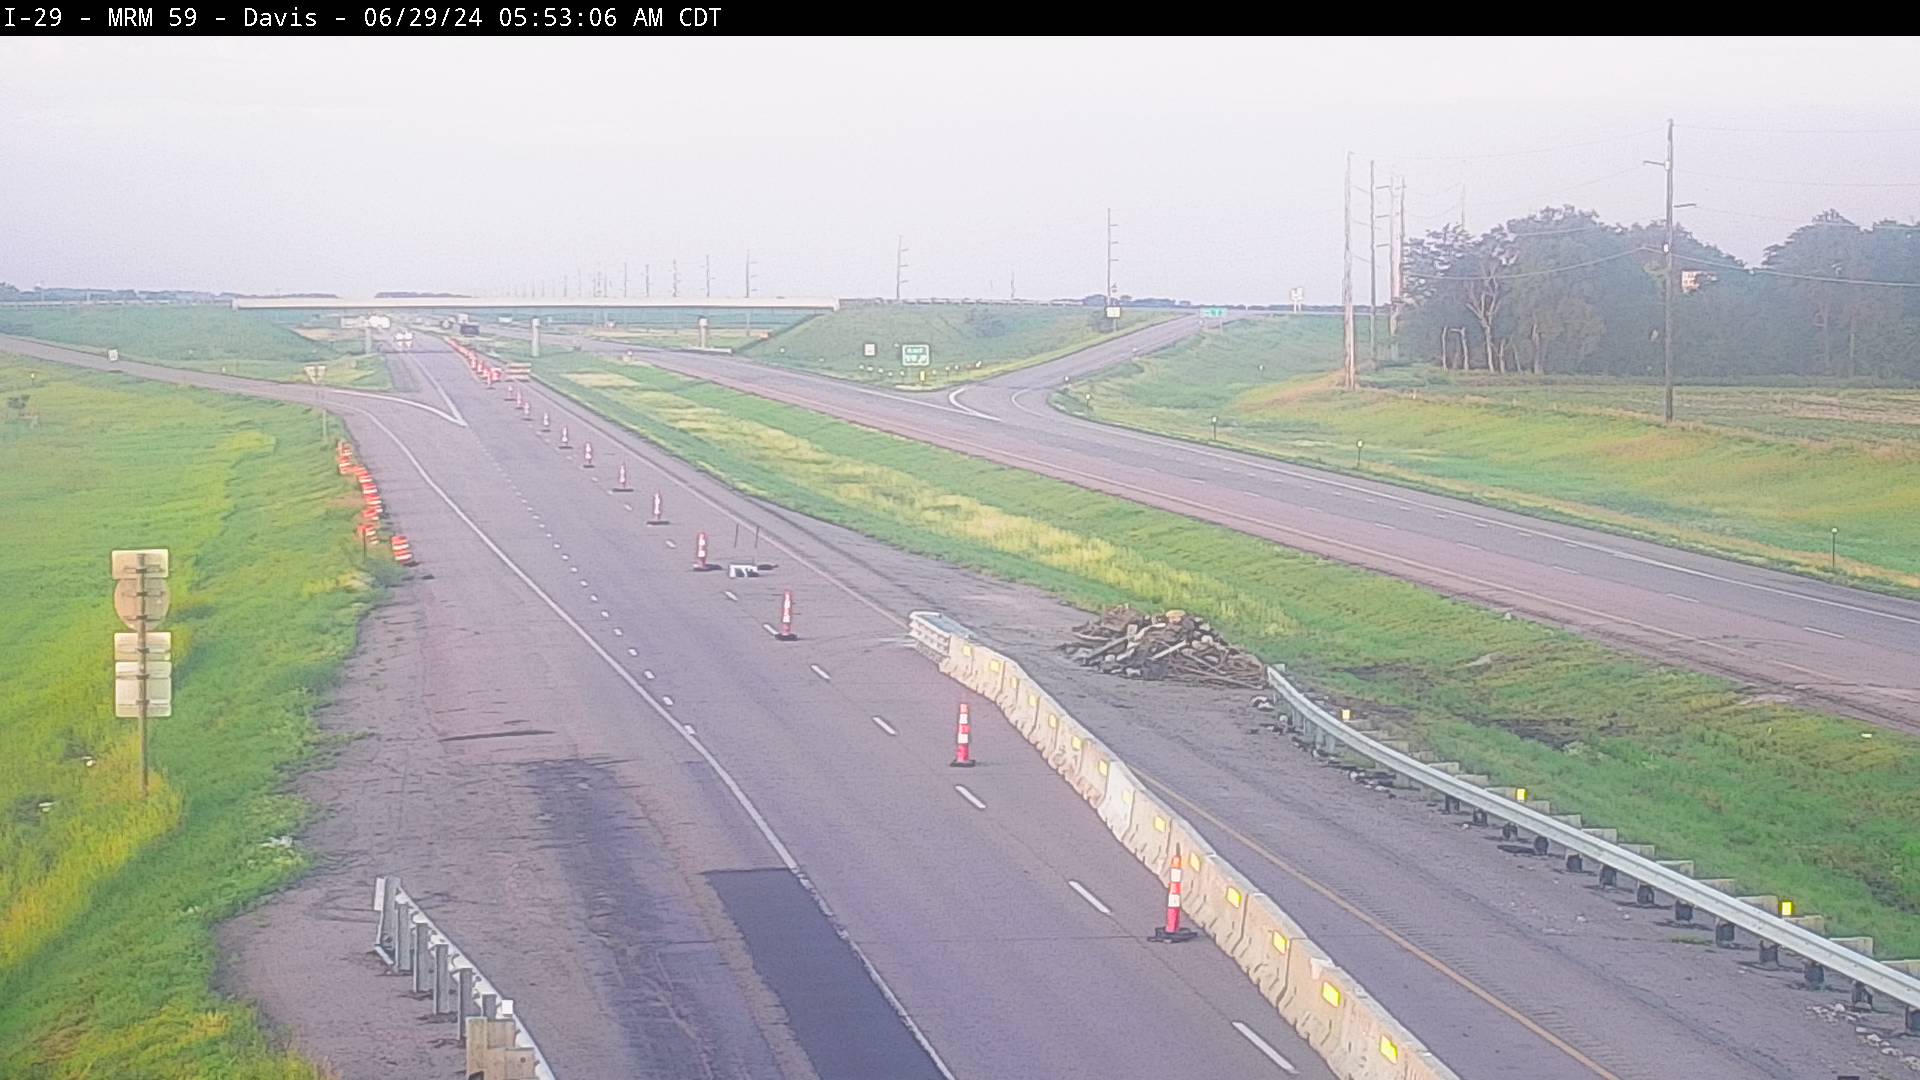 10 miles east of town along I-29 @ MM 59 - South Traffic Camera